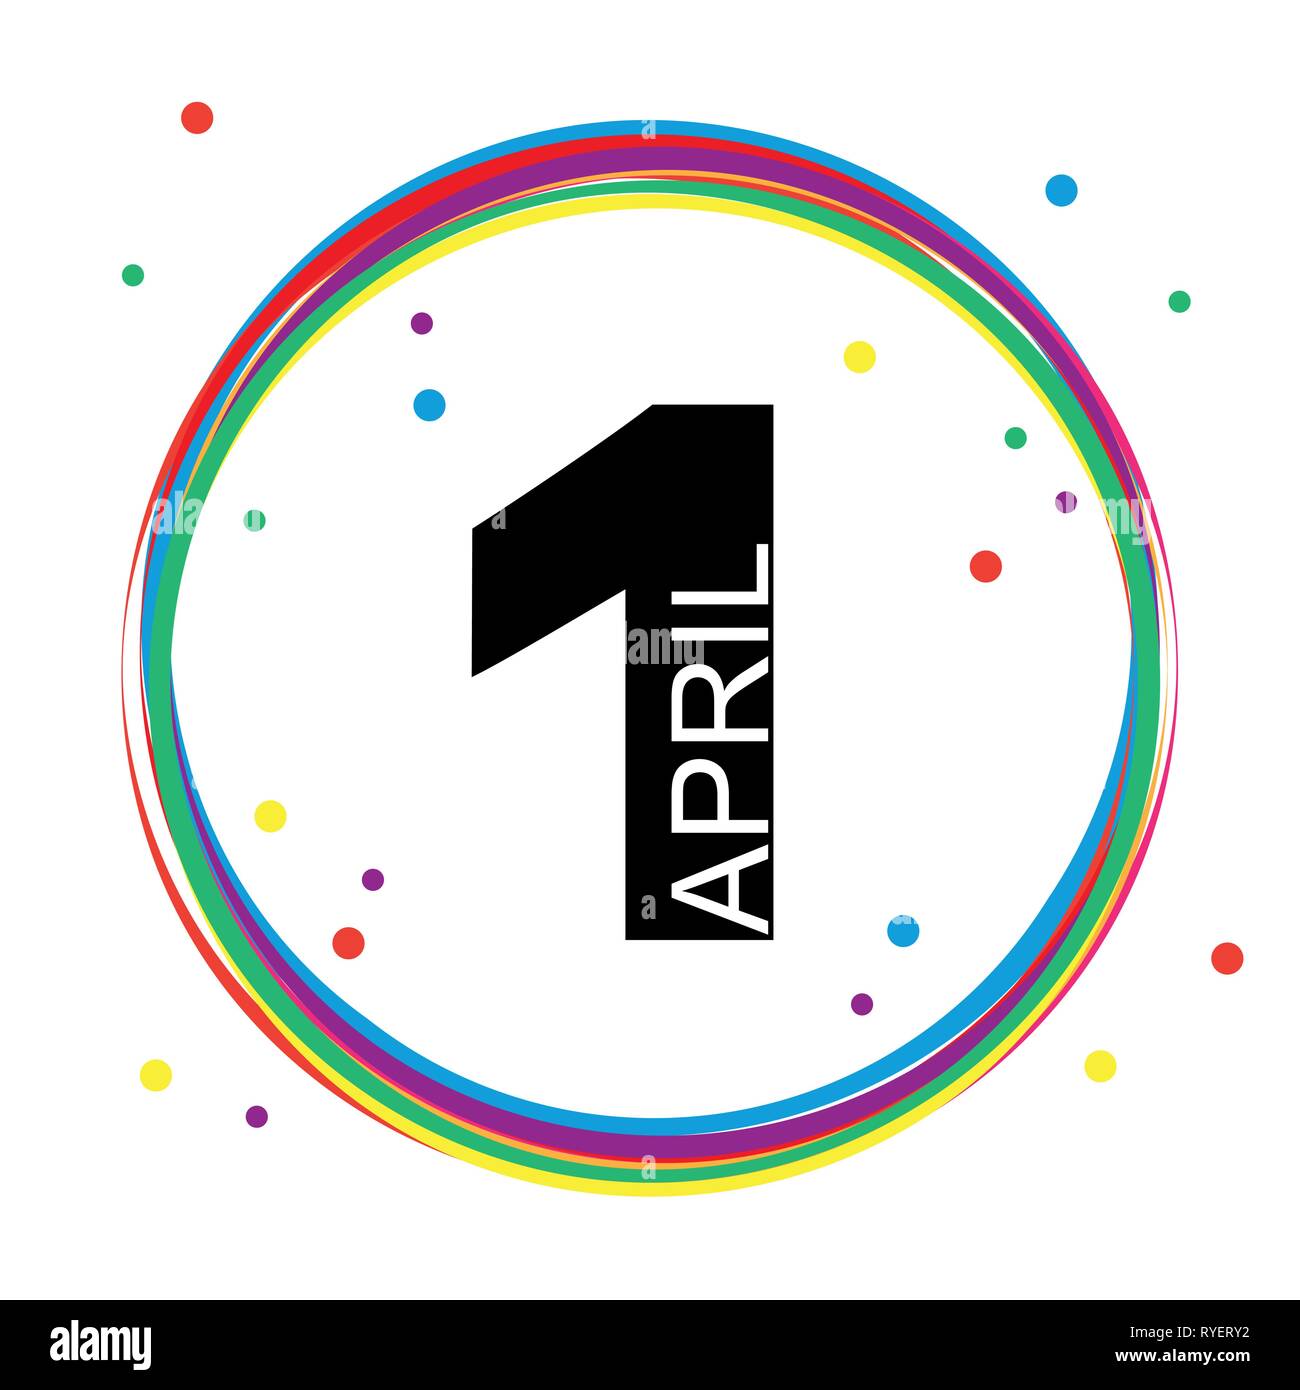 1st april in a colorful circle vector illustration Stock Vector